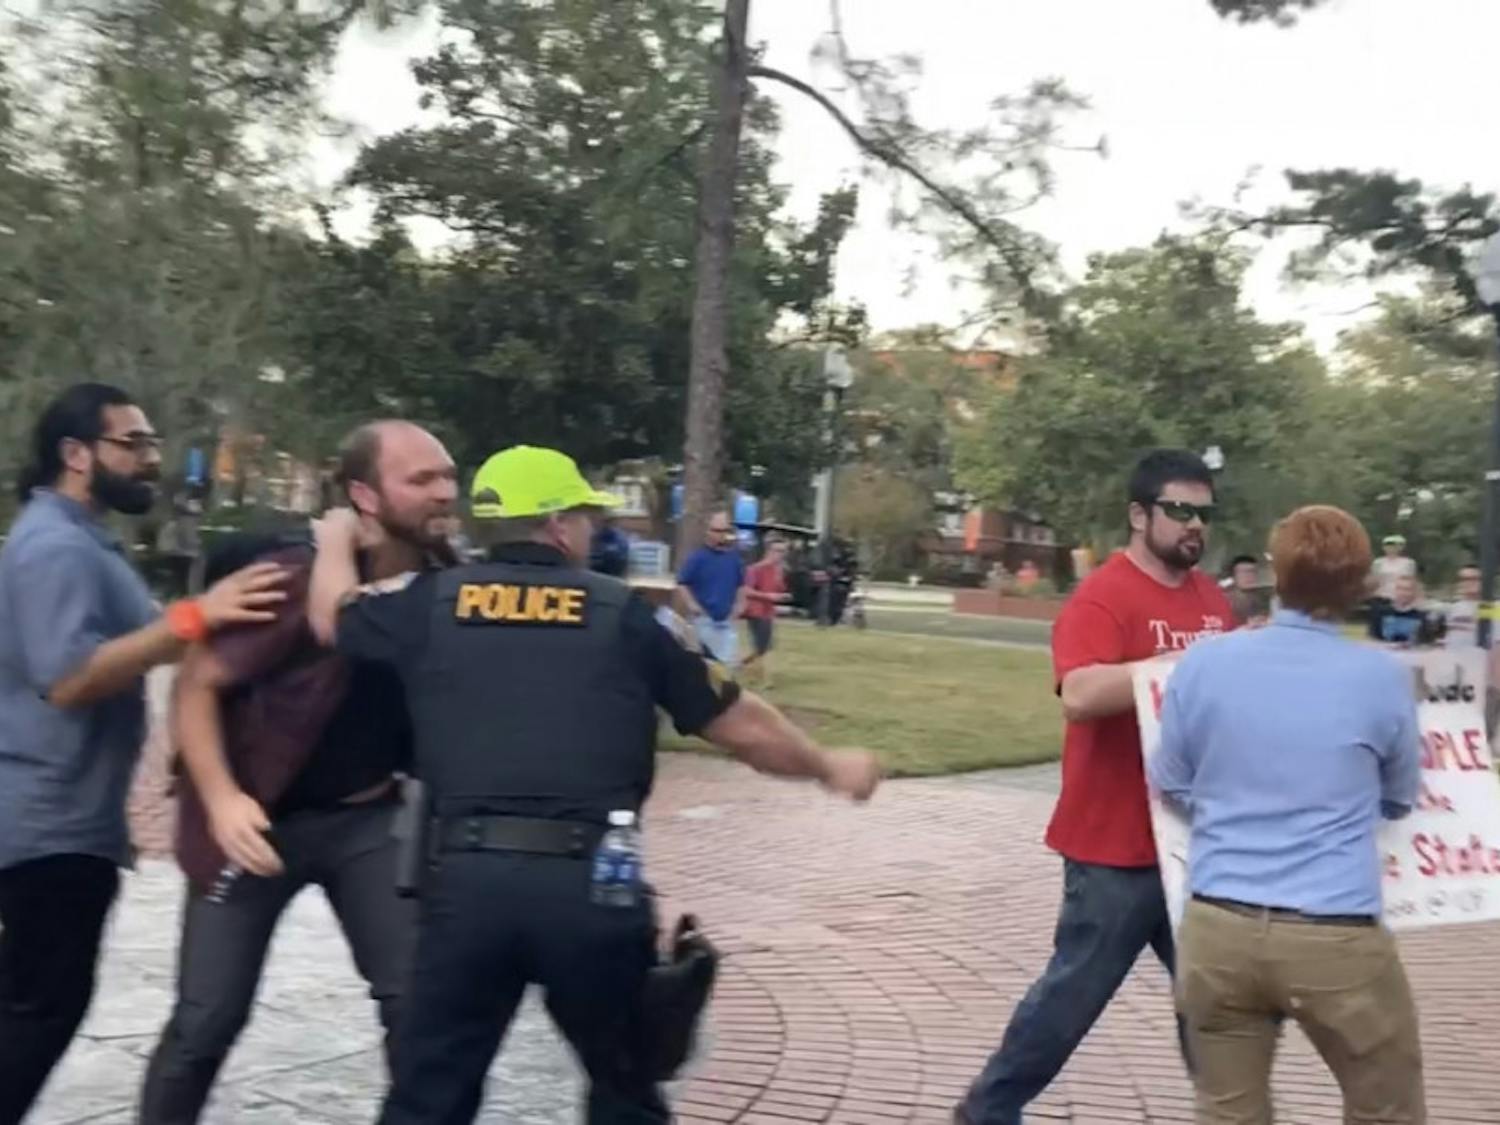 Brian Patrick Smith was outside University Auditorium Thursday night among among protestors who were protesting against Donald Trump Jr. and Kimberly Guilfoyle's speech. Richard Tate was arrested after taking Smith's "Make America Great Again" cap. 